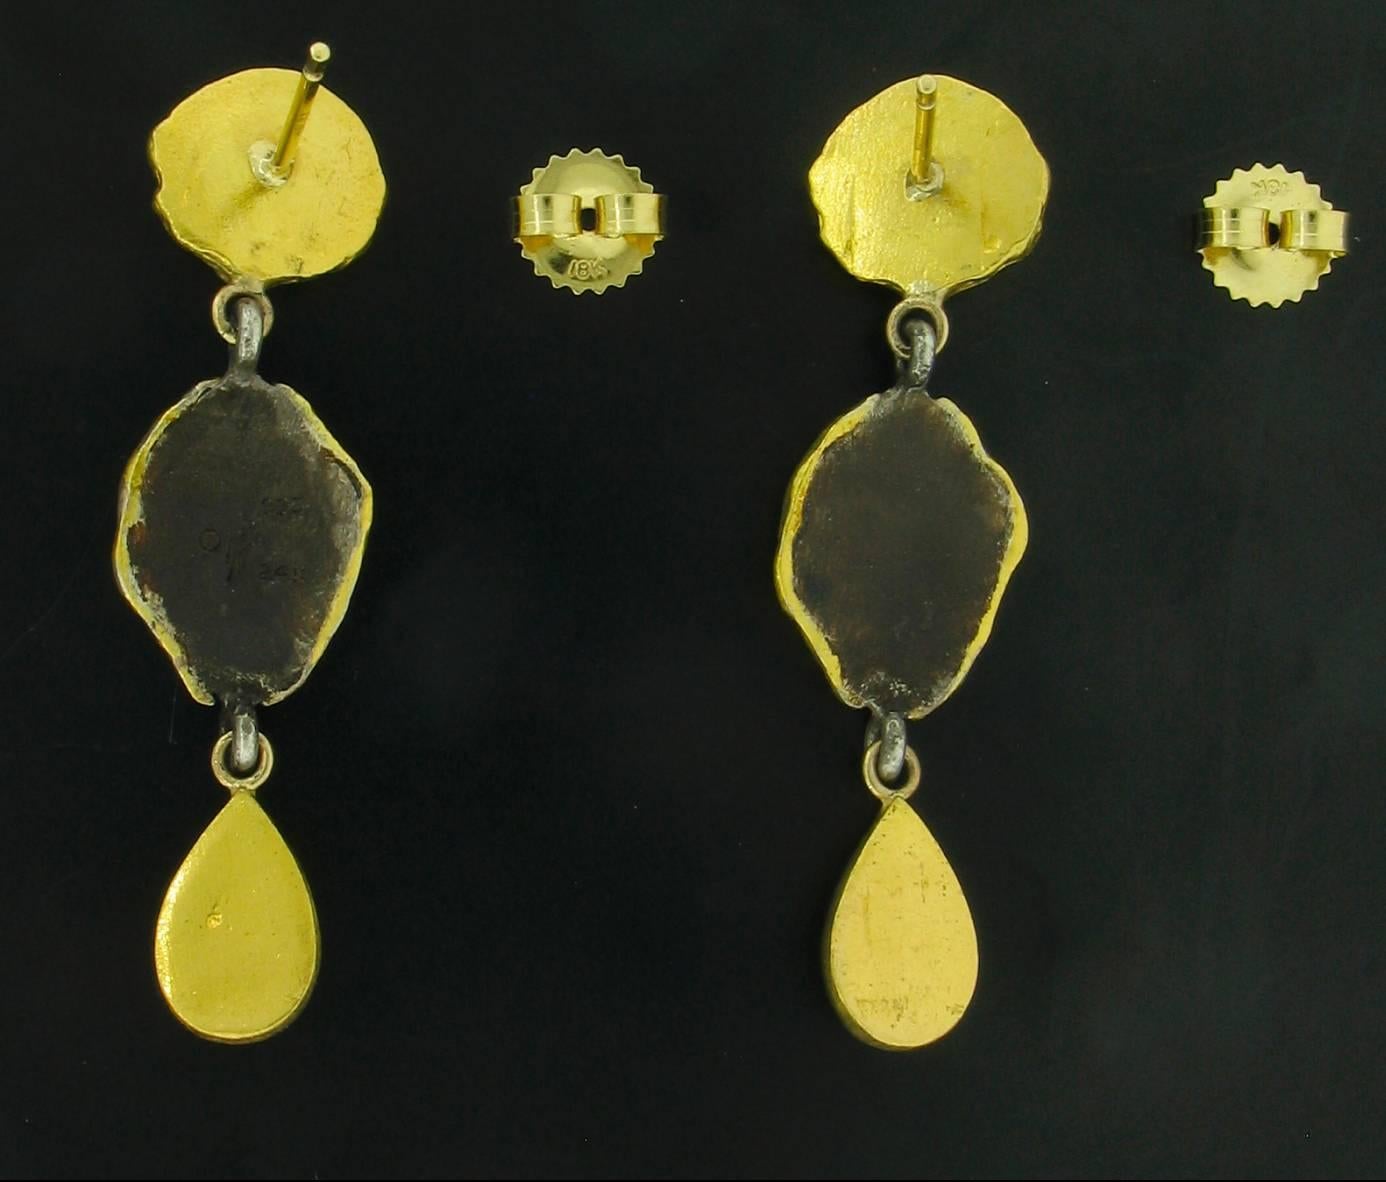 These Earrings were designed and made by well known designer Victor Velyan.   They contain 2 Peridots weighing 3.80 carats, two White Sapphires weighing 0.20 carats, and two little Pearls.  The earrings are made of a base of pure Silver with all